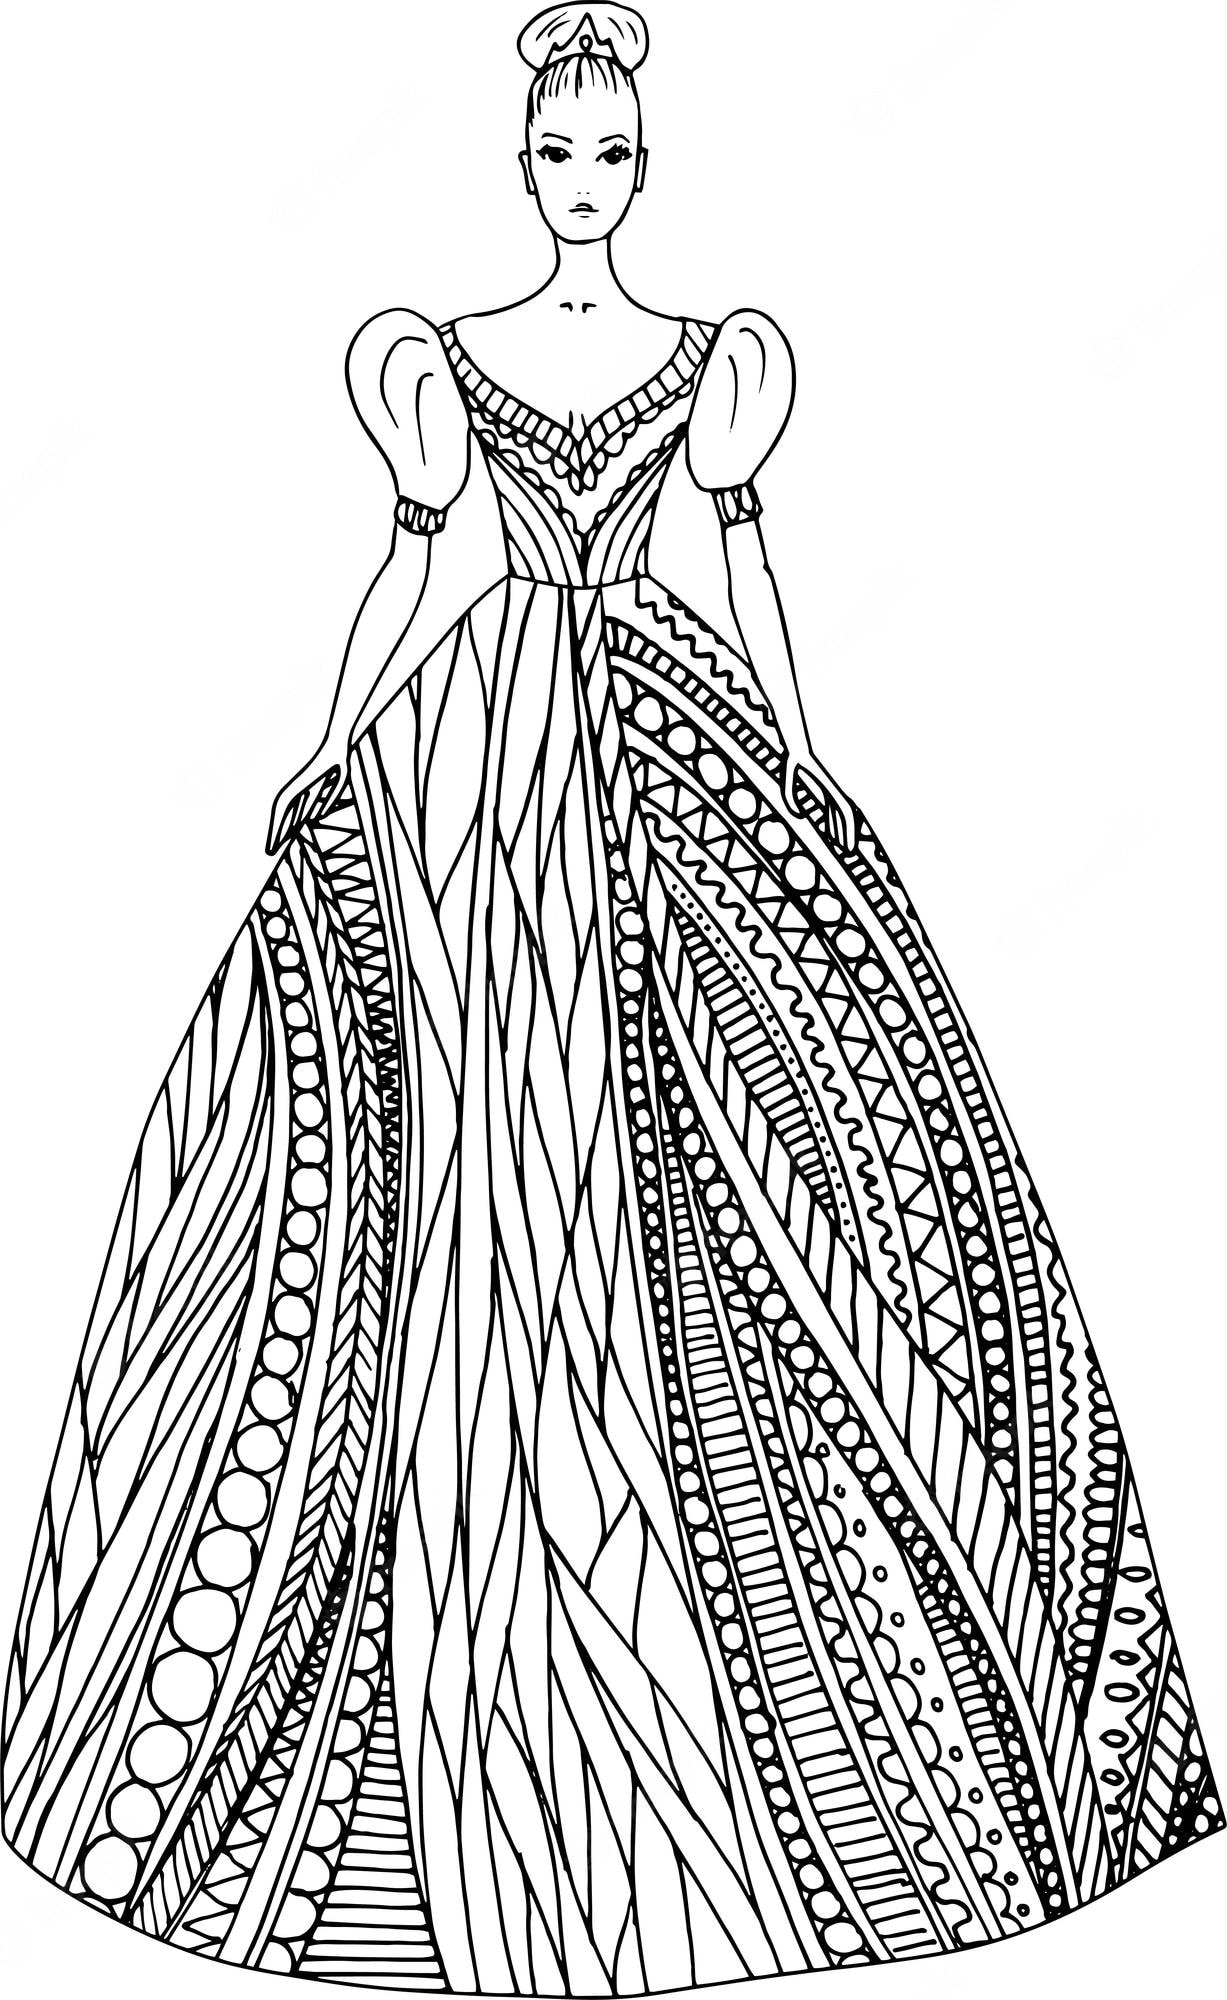 Premium Vector | Doodle girl in beautiful fantasy dress coloring page for  adults fantastic graphic artwork hand drawn illustration